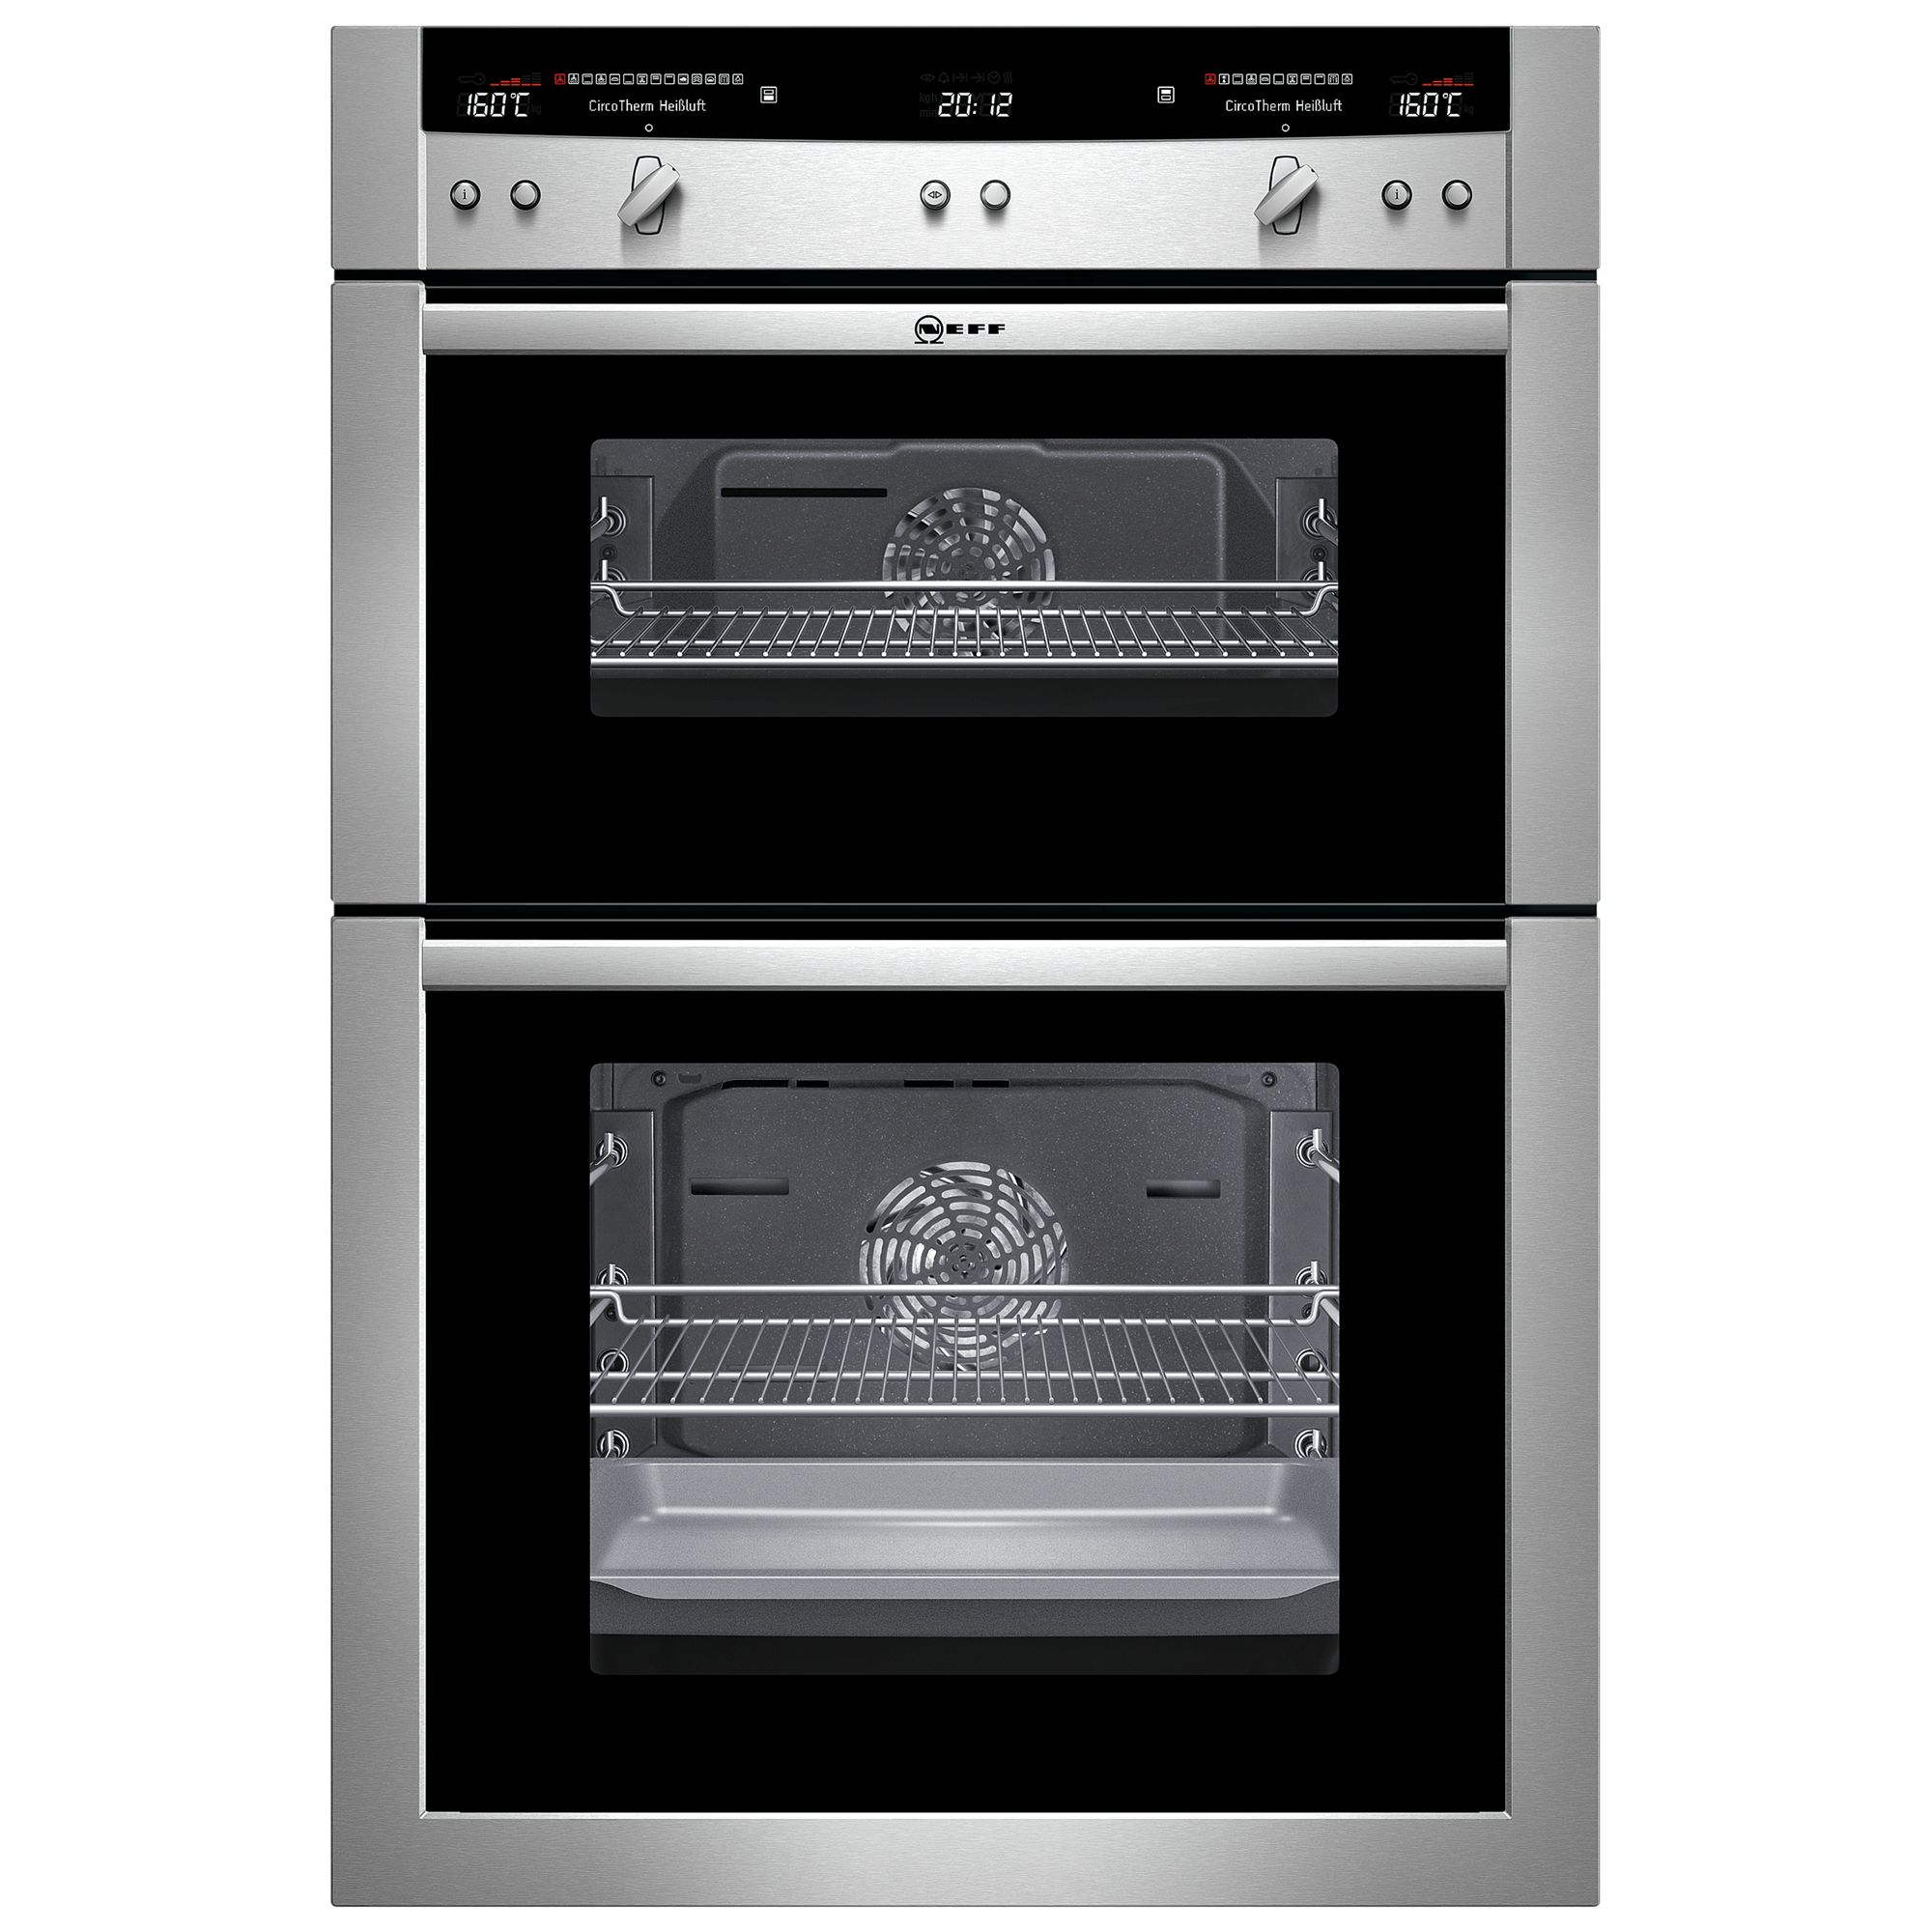 Neff U16E74N3GB Double Electric Oven, Stainless Steel